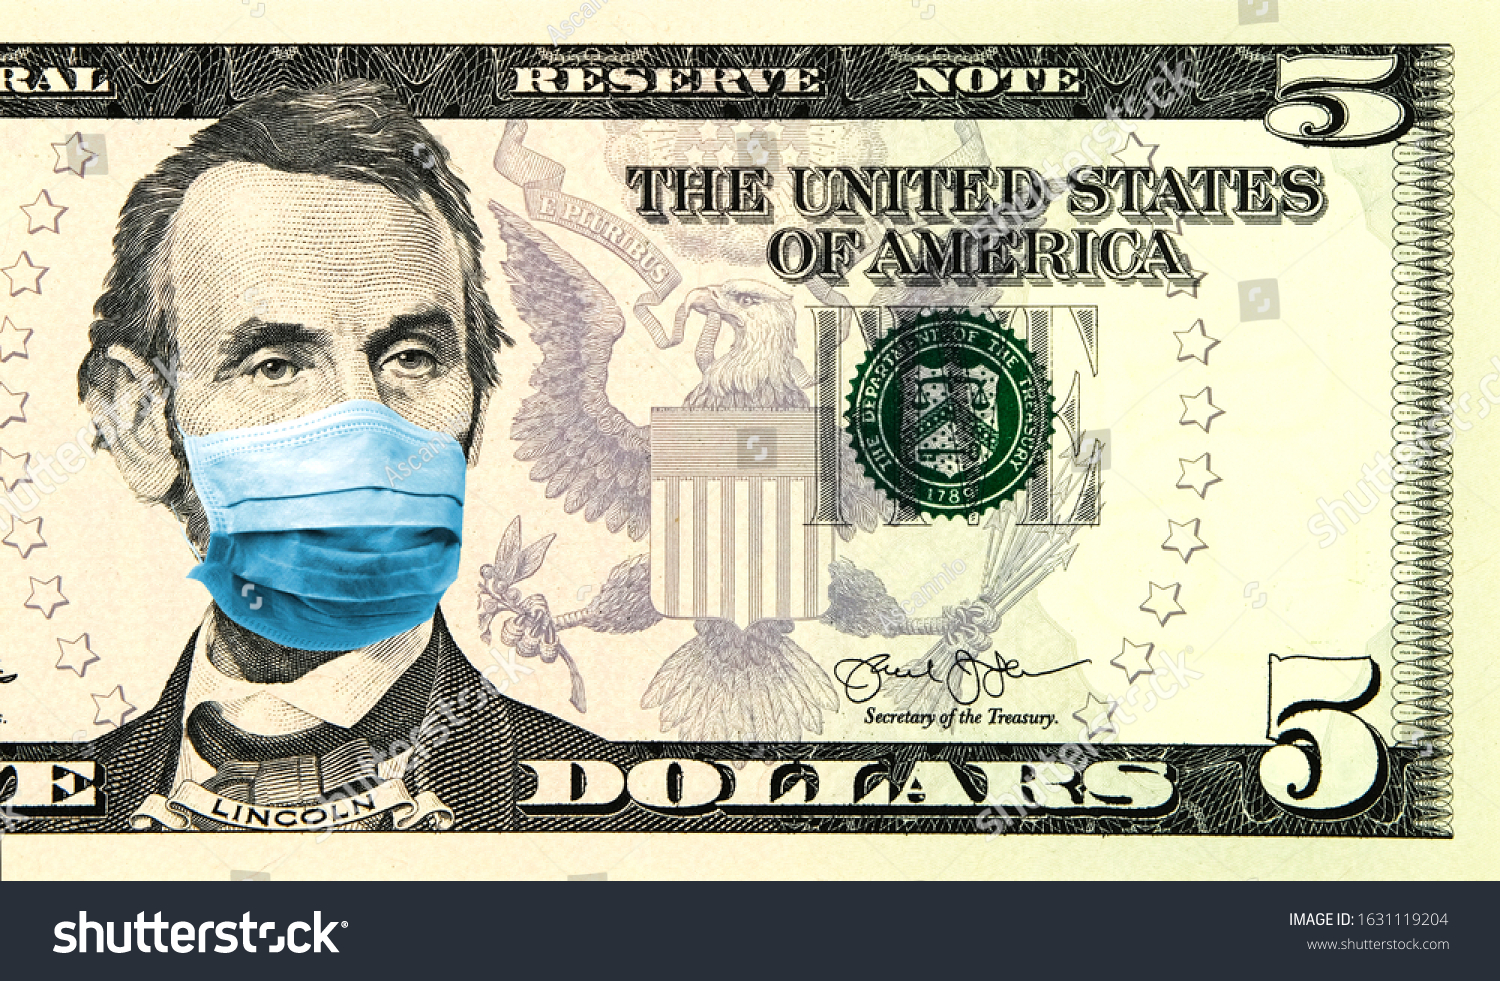 Omicron COVID Coronavirus vs Finance. Quarantine and global recession. 5 American dollar banknote with a face mask against infection. Global economy hit by corona virus pandemic. Montage. Concept #1631119204